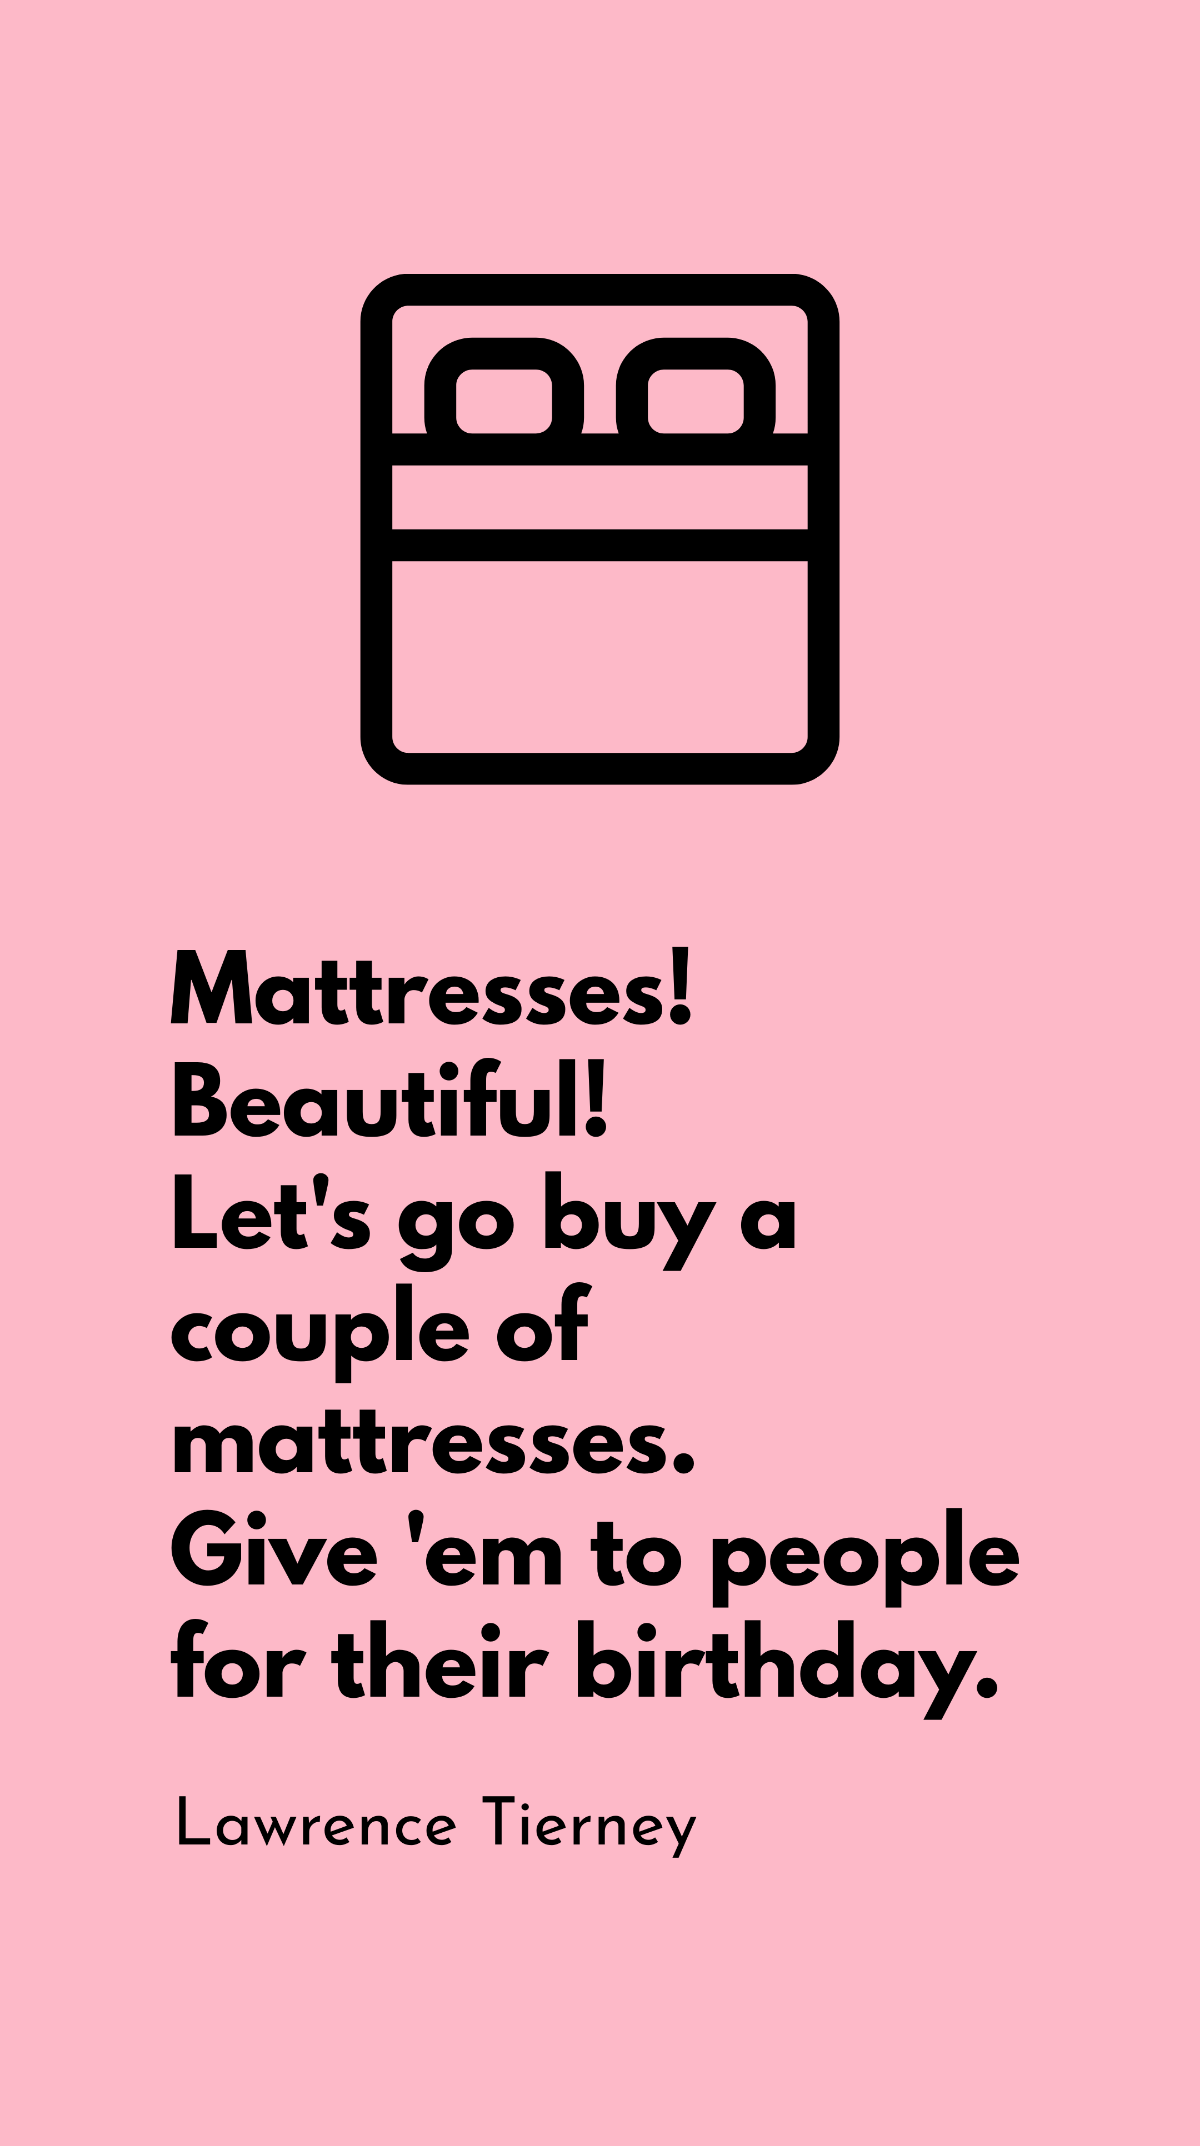 Lawrence Tierney - Mattresses! Beautiful! Let's go buy a couple of mattresses. Give 'em to people for their birthday.